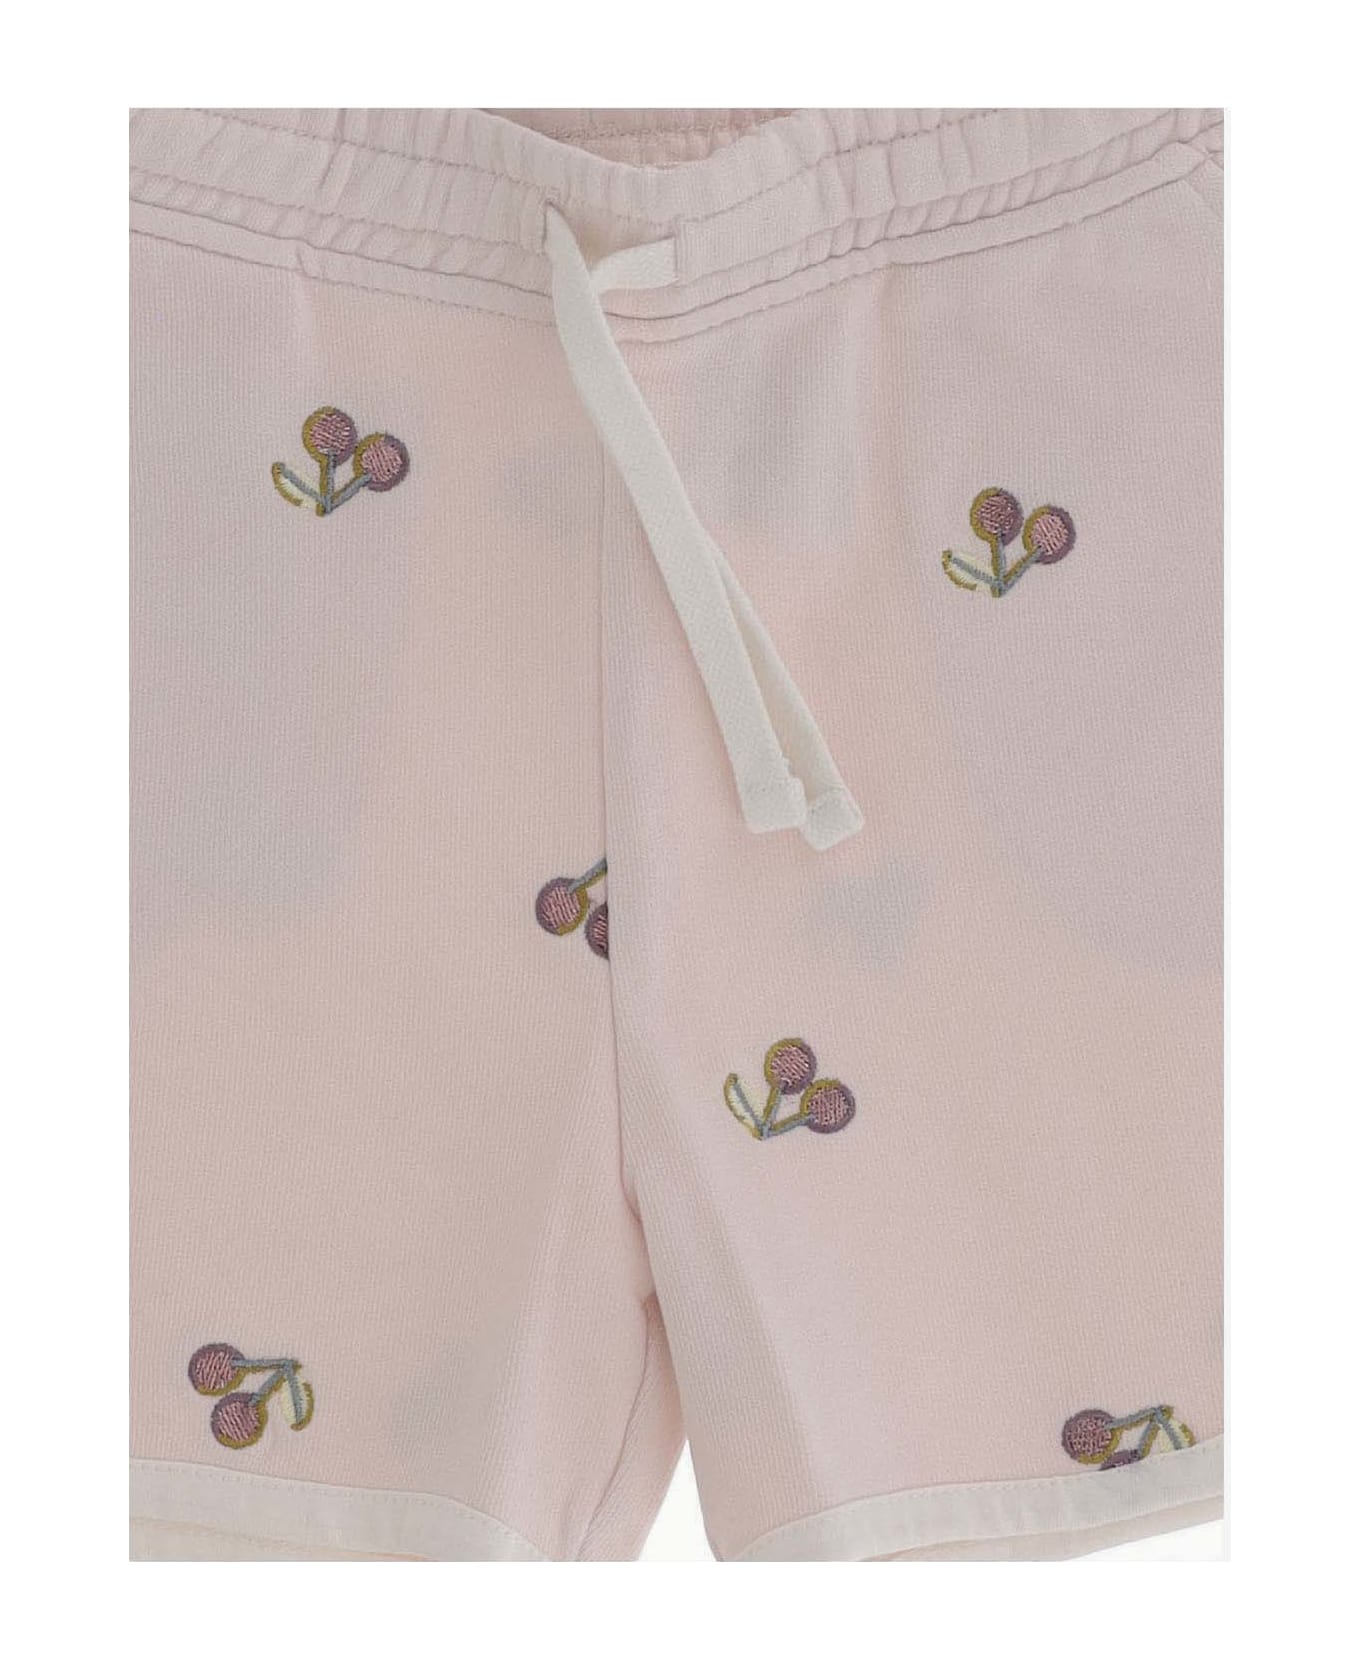 Bonpoint Cotton Shorts With Cherries Pattern - Pink